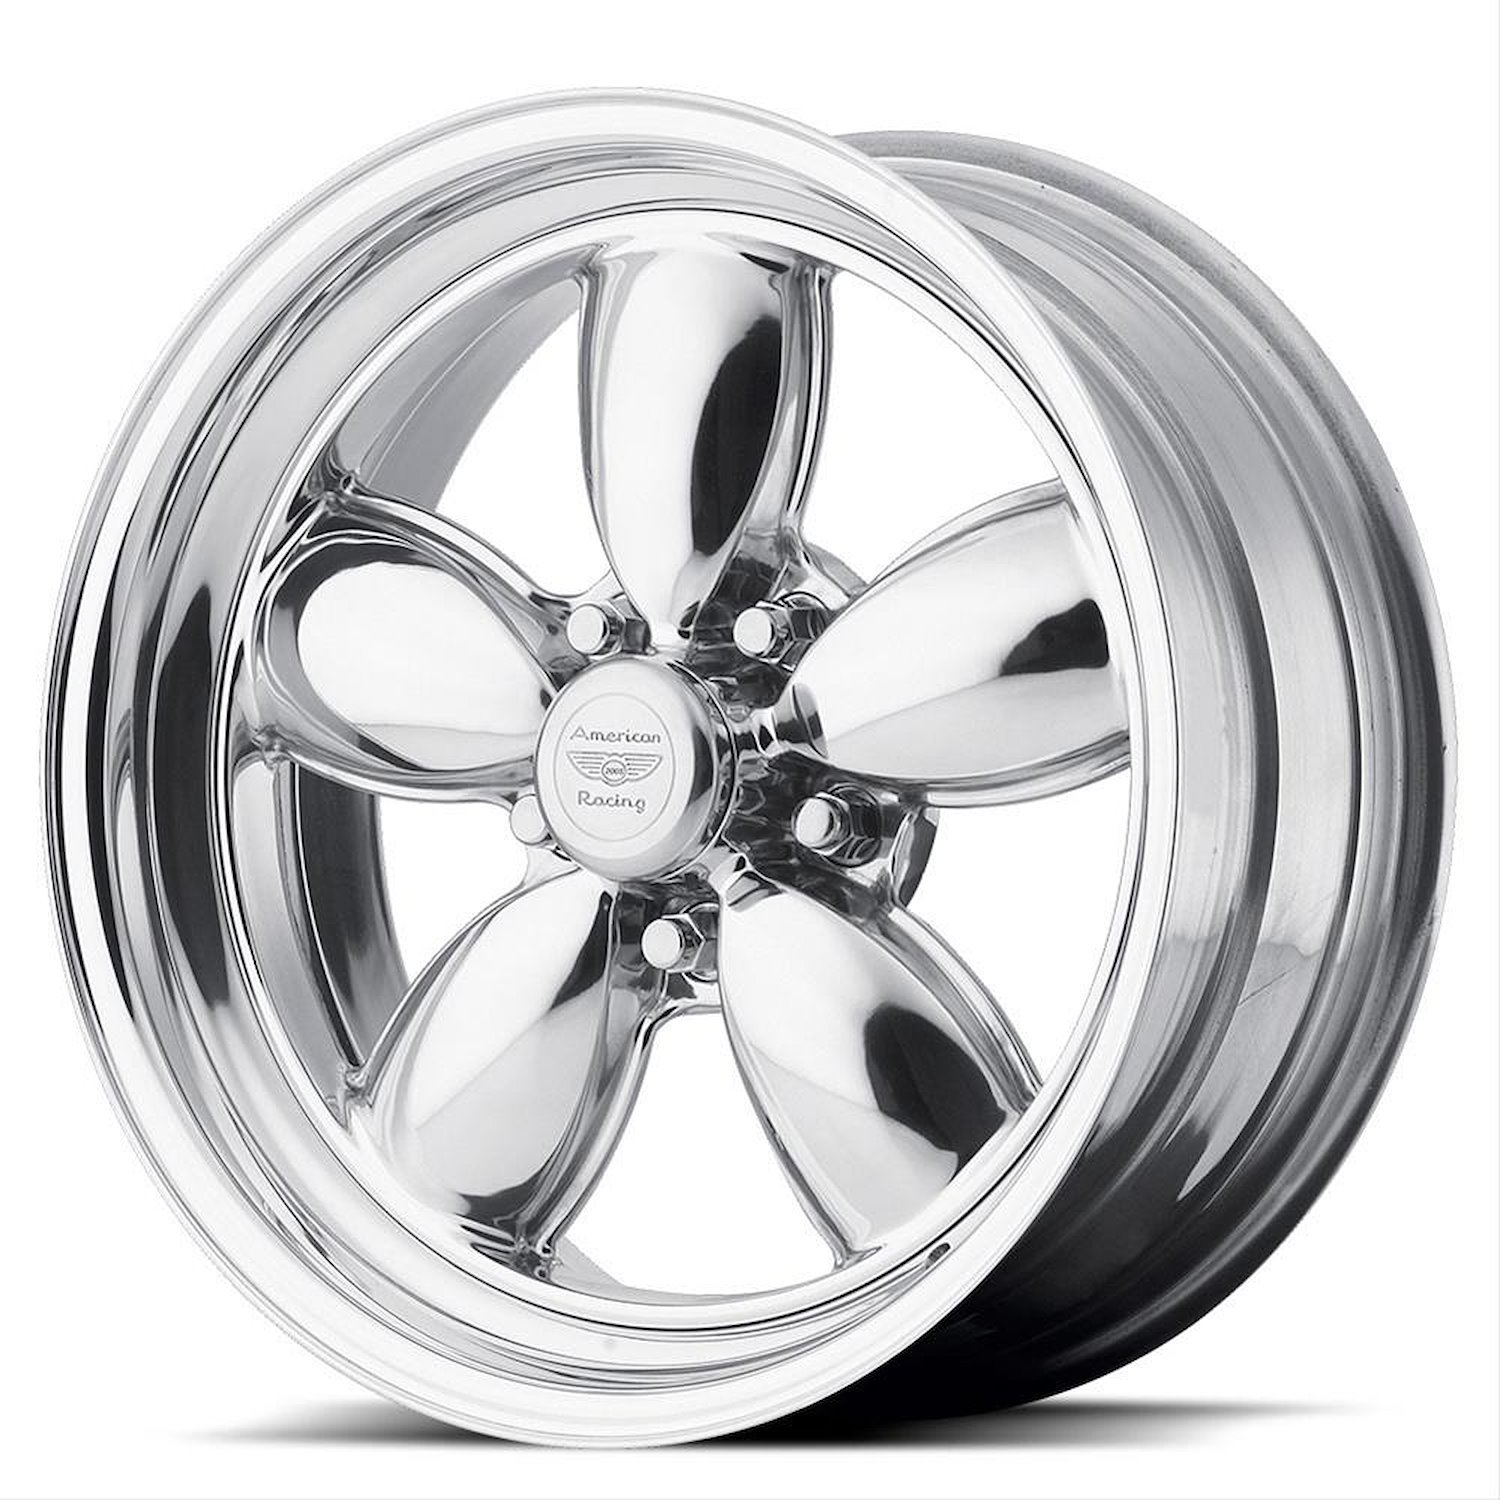 AMERICAN RACING CLASSIC 200S TWO-PIECE POLISHED 17 x 7 5x4.5 0 4.00